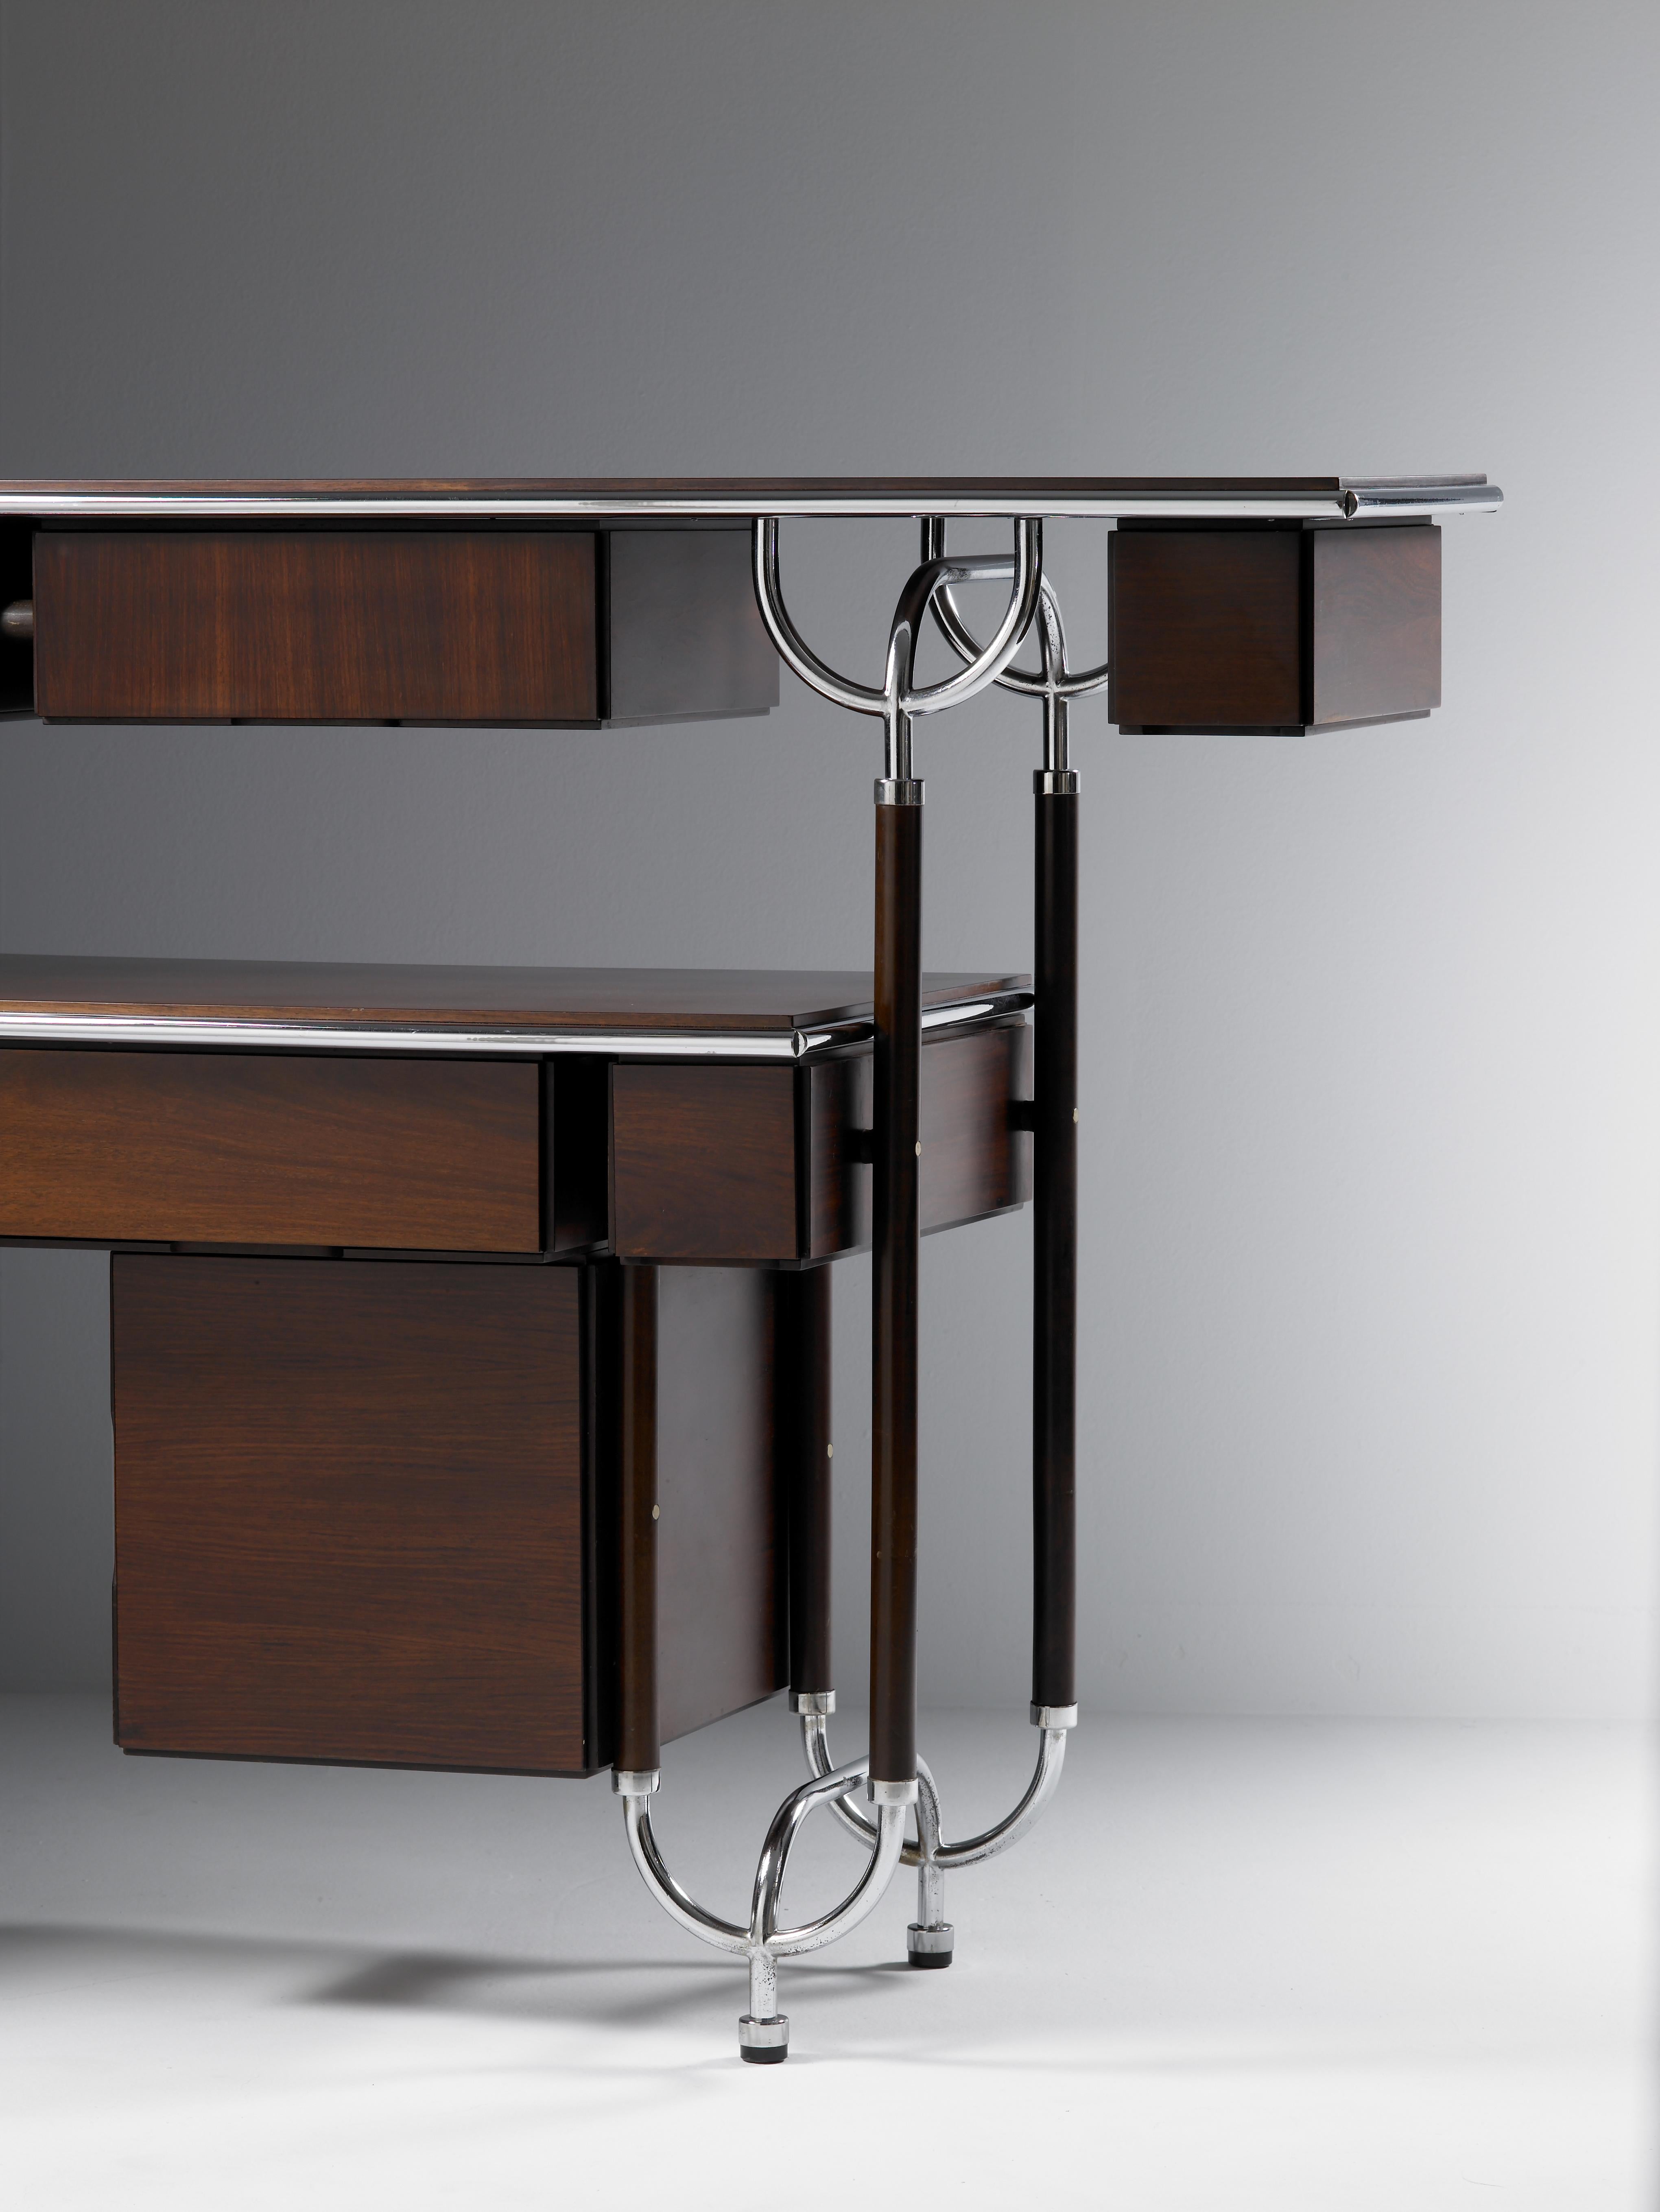 Sideboard by Roberto Gabetti, Aimaro Isola, Luciano Re, Guido Drocco.
Turin, Italy, 1970. Manufactured by ARBO. Chromed steel, veneering.
Measures: 225 x 59 x H 114 cm. 88.6 x 23.2 x H 44.8 in.
Reference: Fulvio Ferrari, Gabetti e Isola mobili